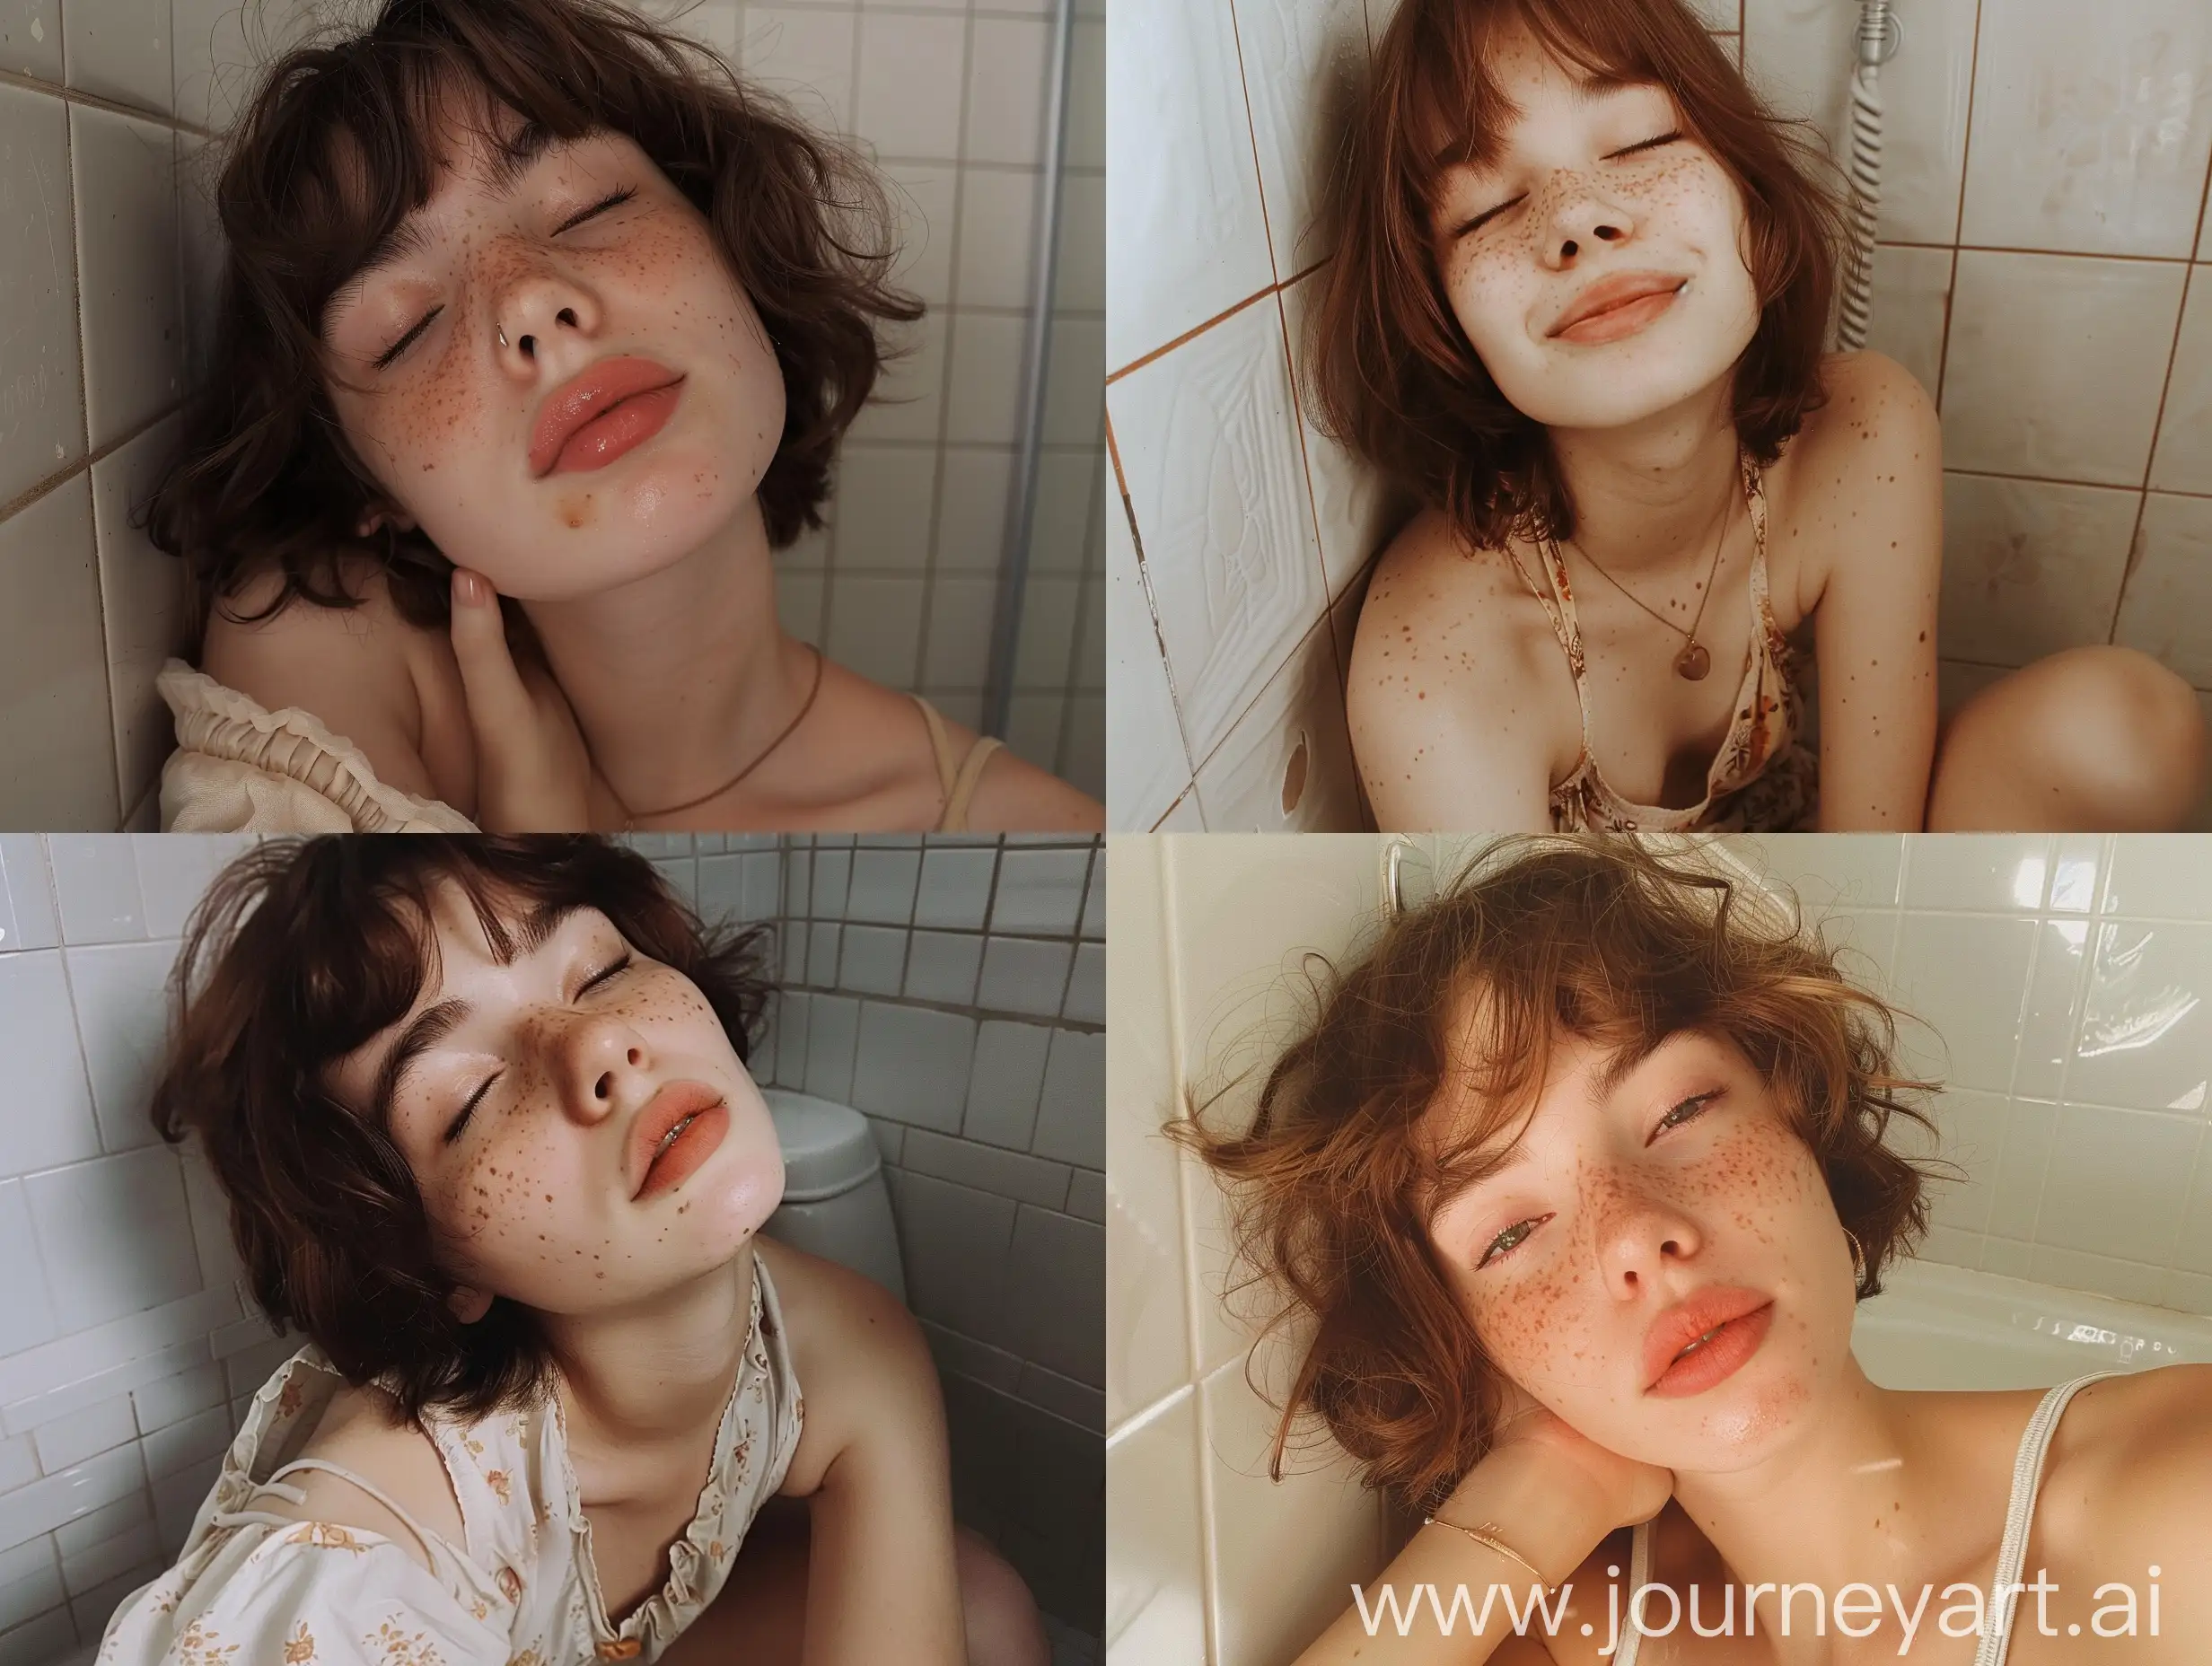 Cute-Instagram-Selfie-of-a-Young-Girl-in-the-Bathroom-with-Freckles-and-Short-Brown-Hair